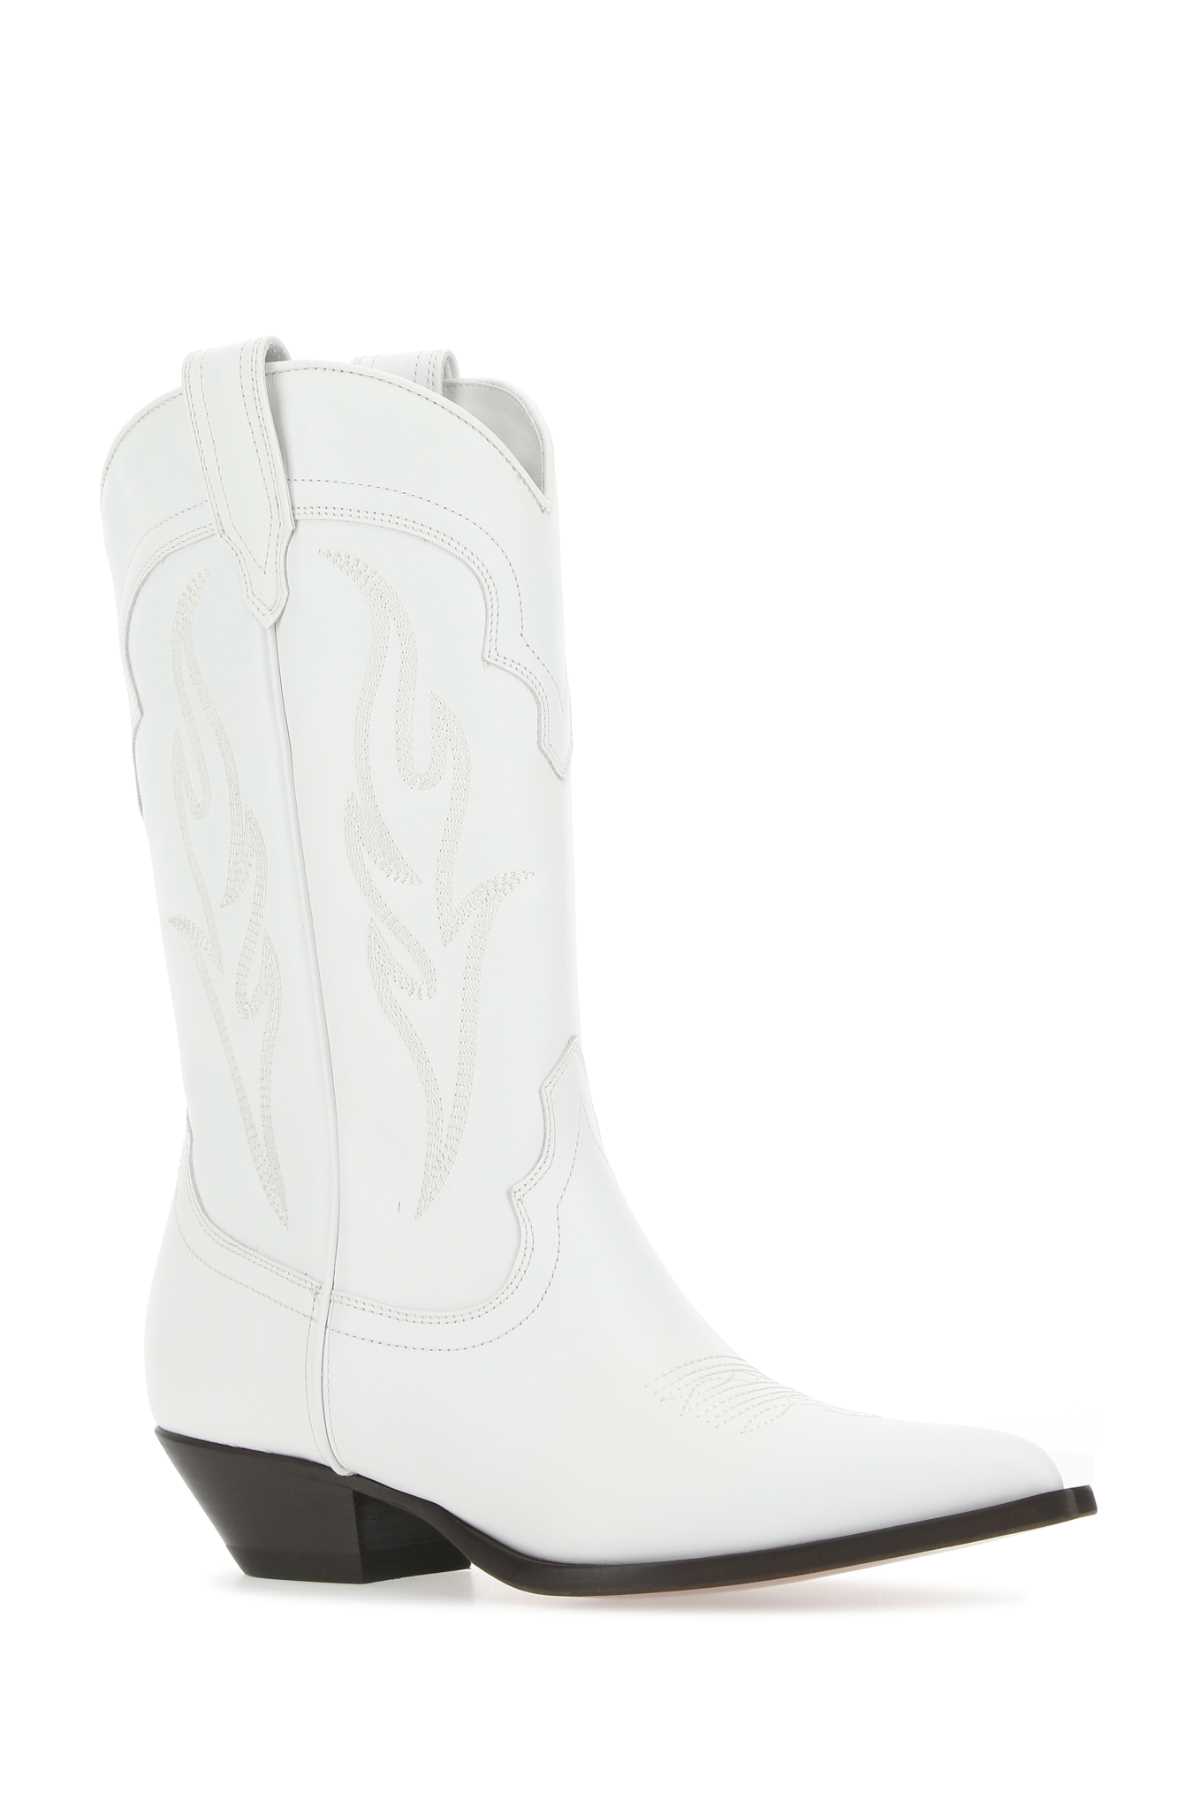 Shop Sonora White Leather Santa Fe Ankle Boots